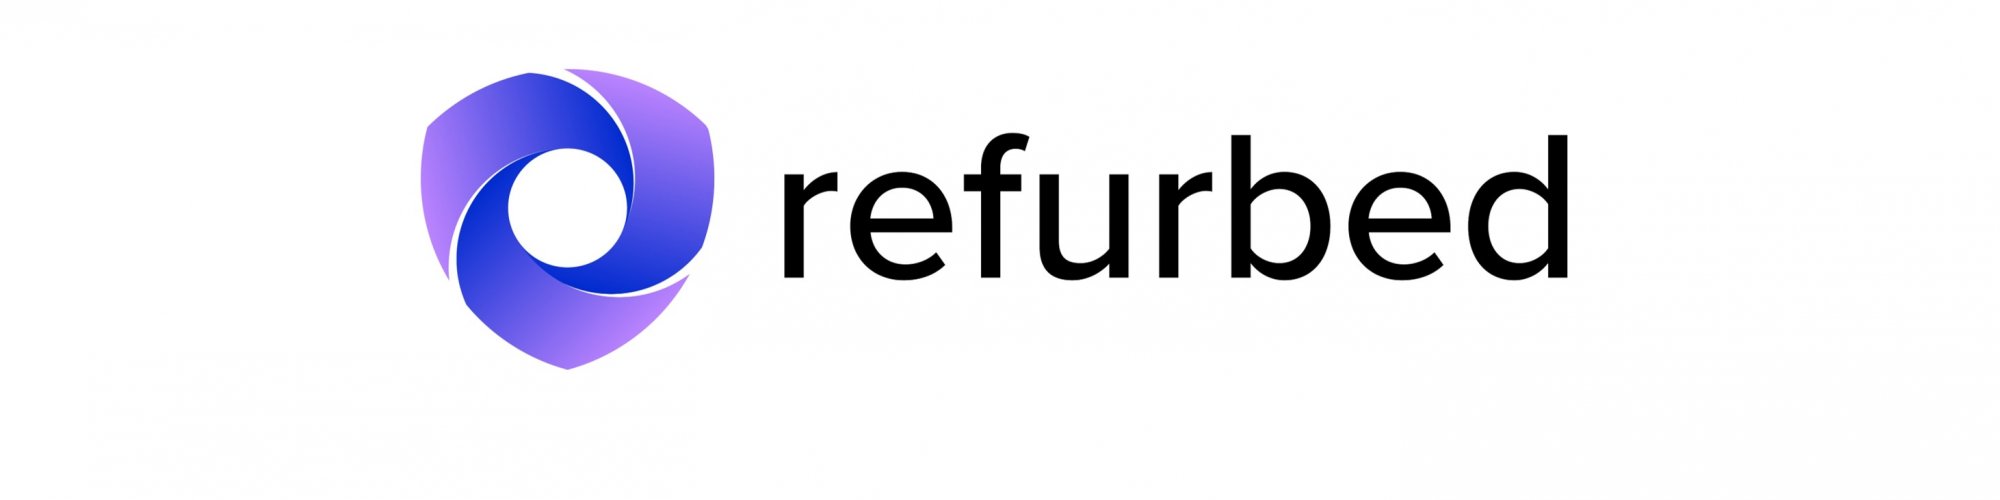 Refurbed coupon codes, promo codes and deals